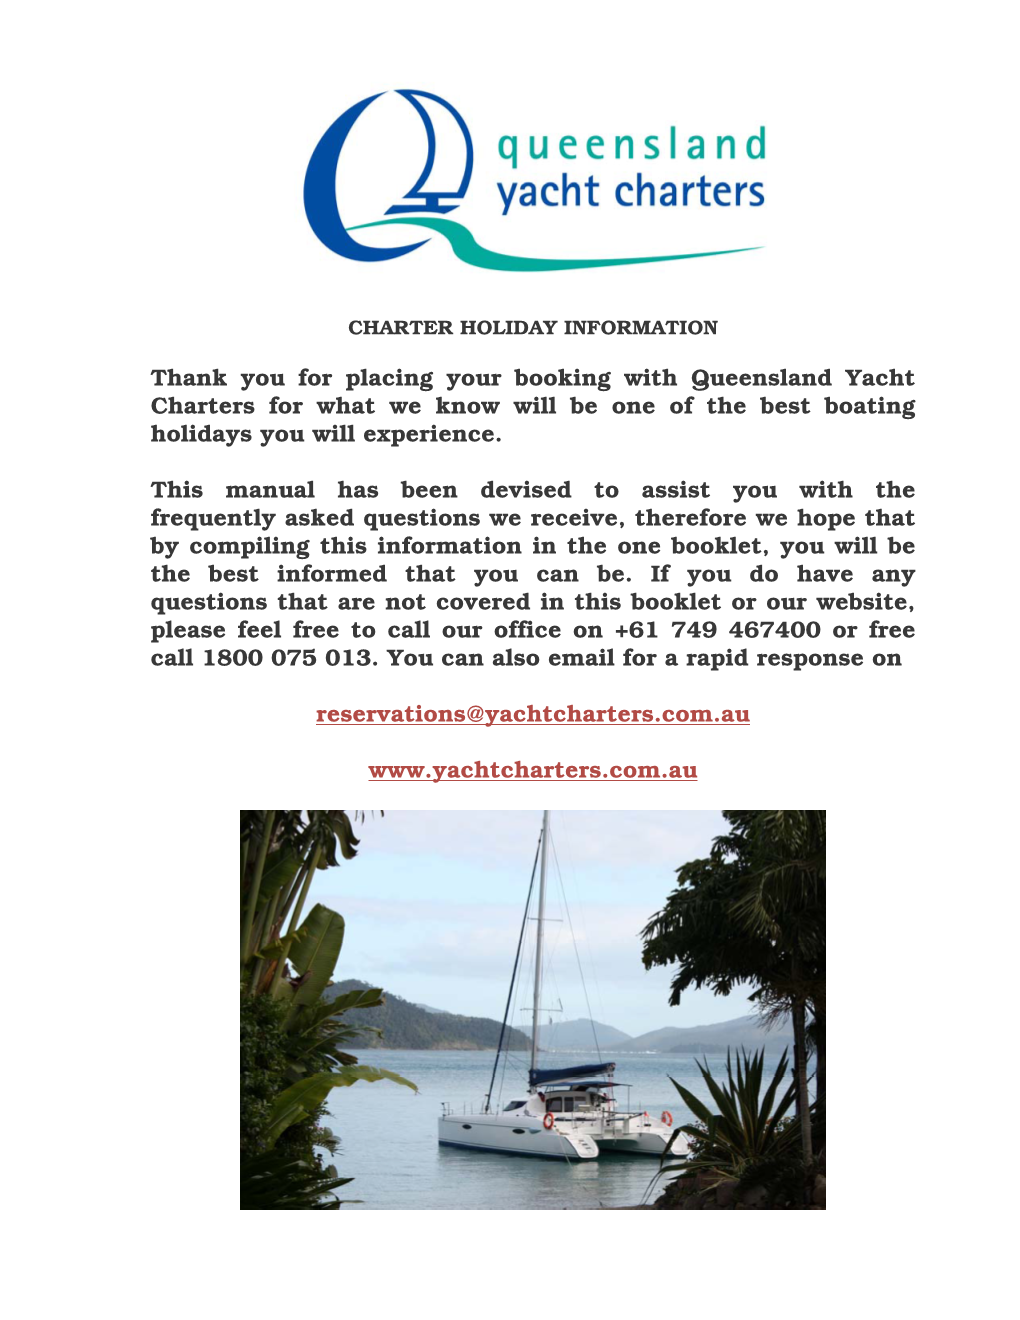 Thank You for Placing Your Booking with Queensland Yacht Charters for What We Know Will Be One of the Best Boating Holidays You Will Experience